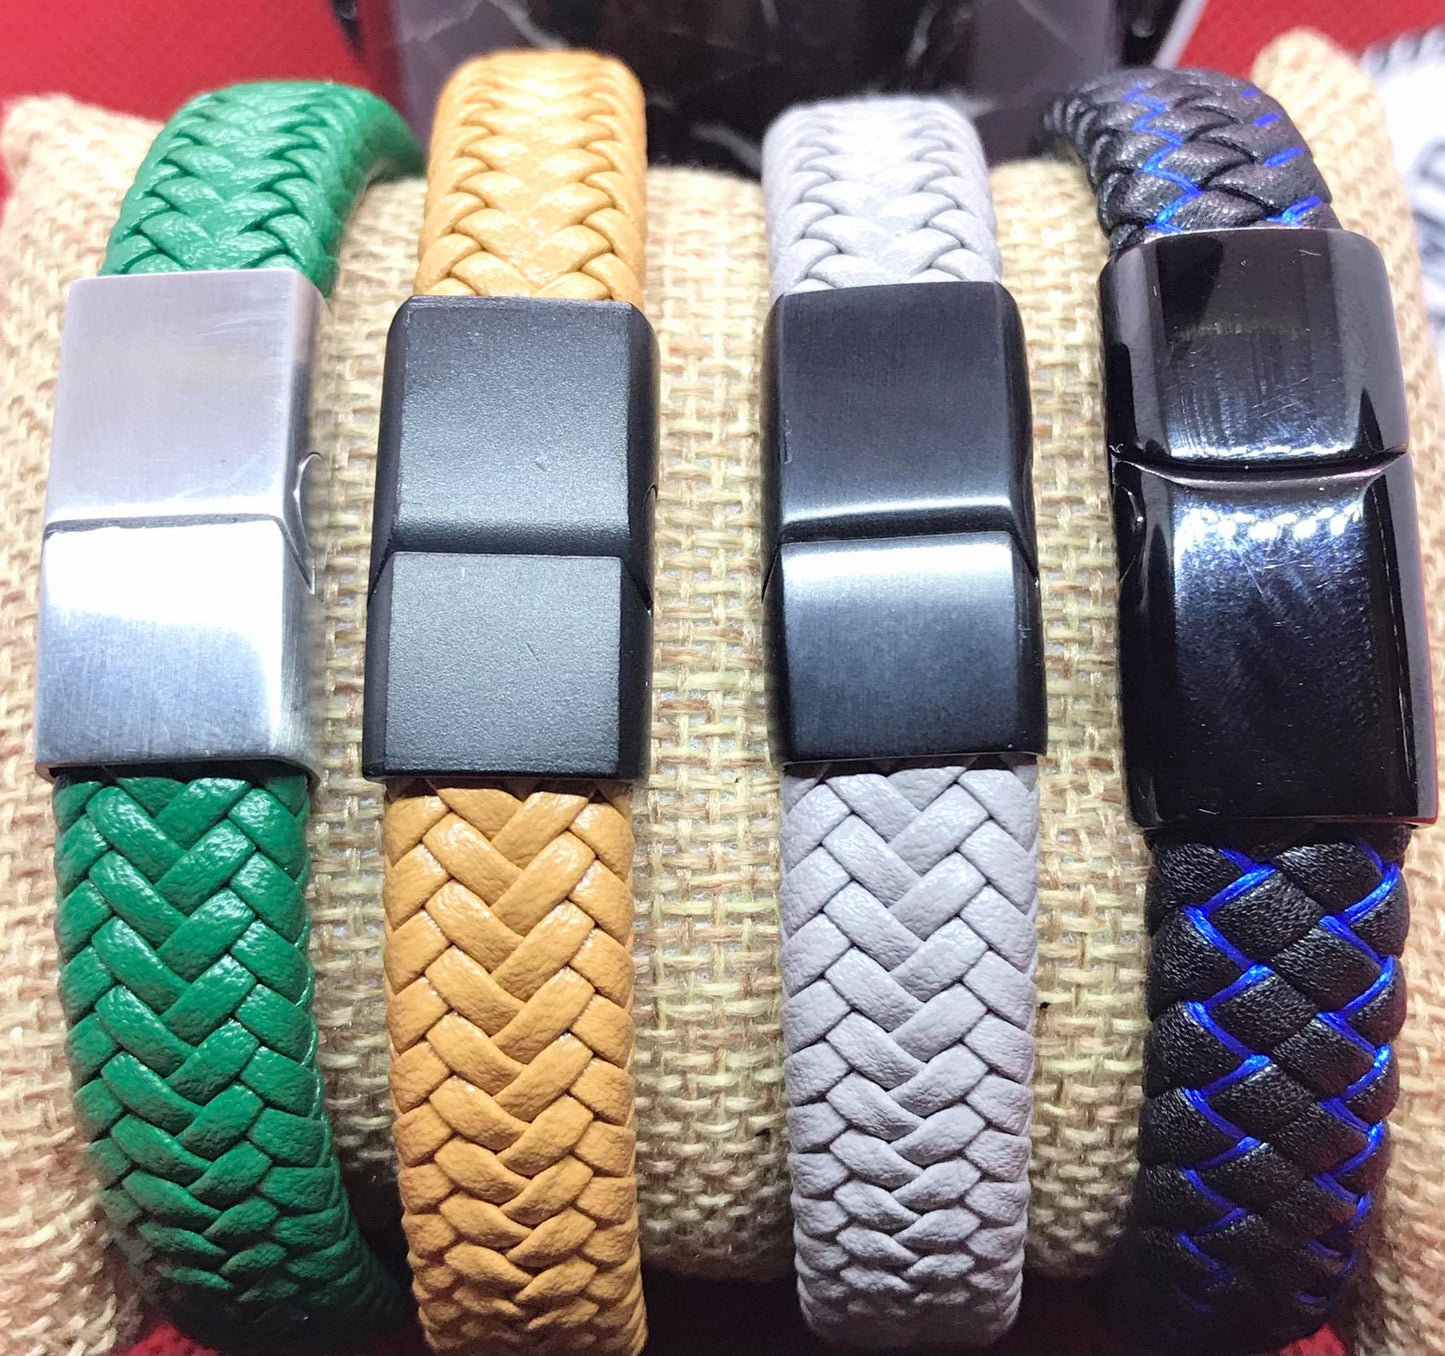 Obsidian with Green Chalcedony and Green Braided Leather Bracelet for Men